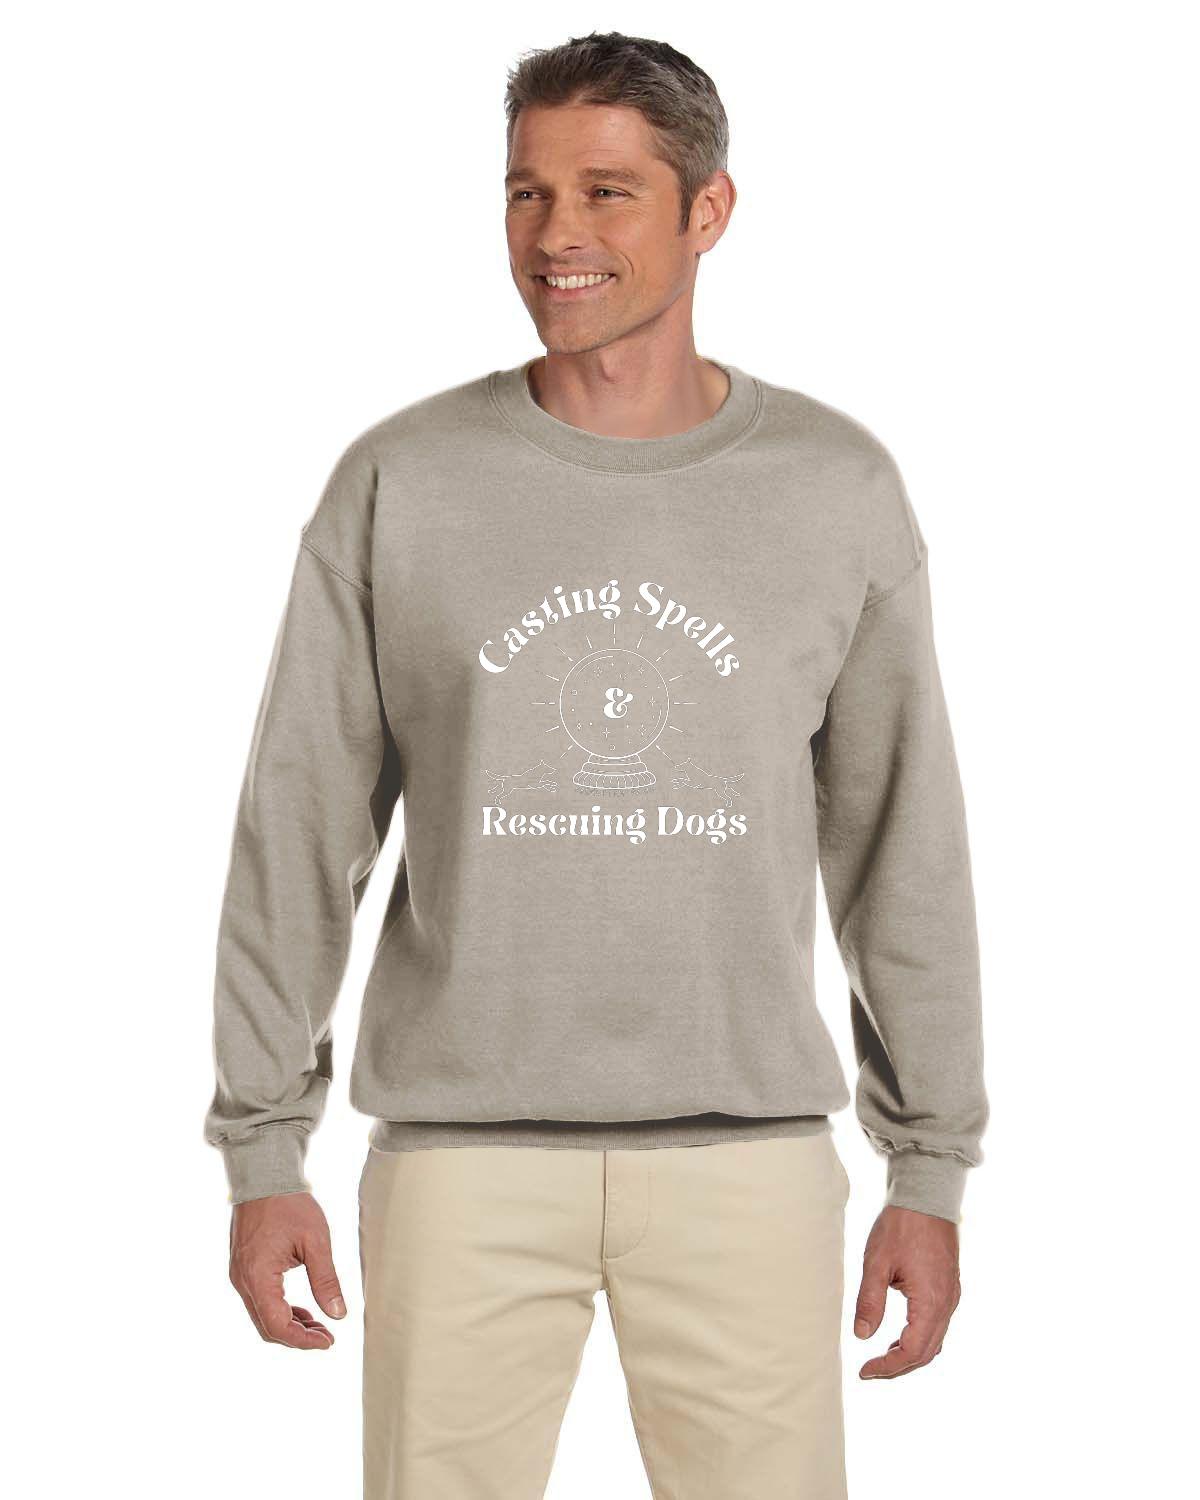 Casting Spells and Rescuing Dogs Crystal Ball Sweatshirt